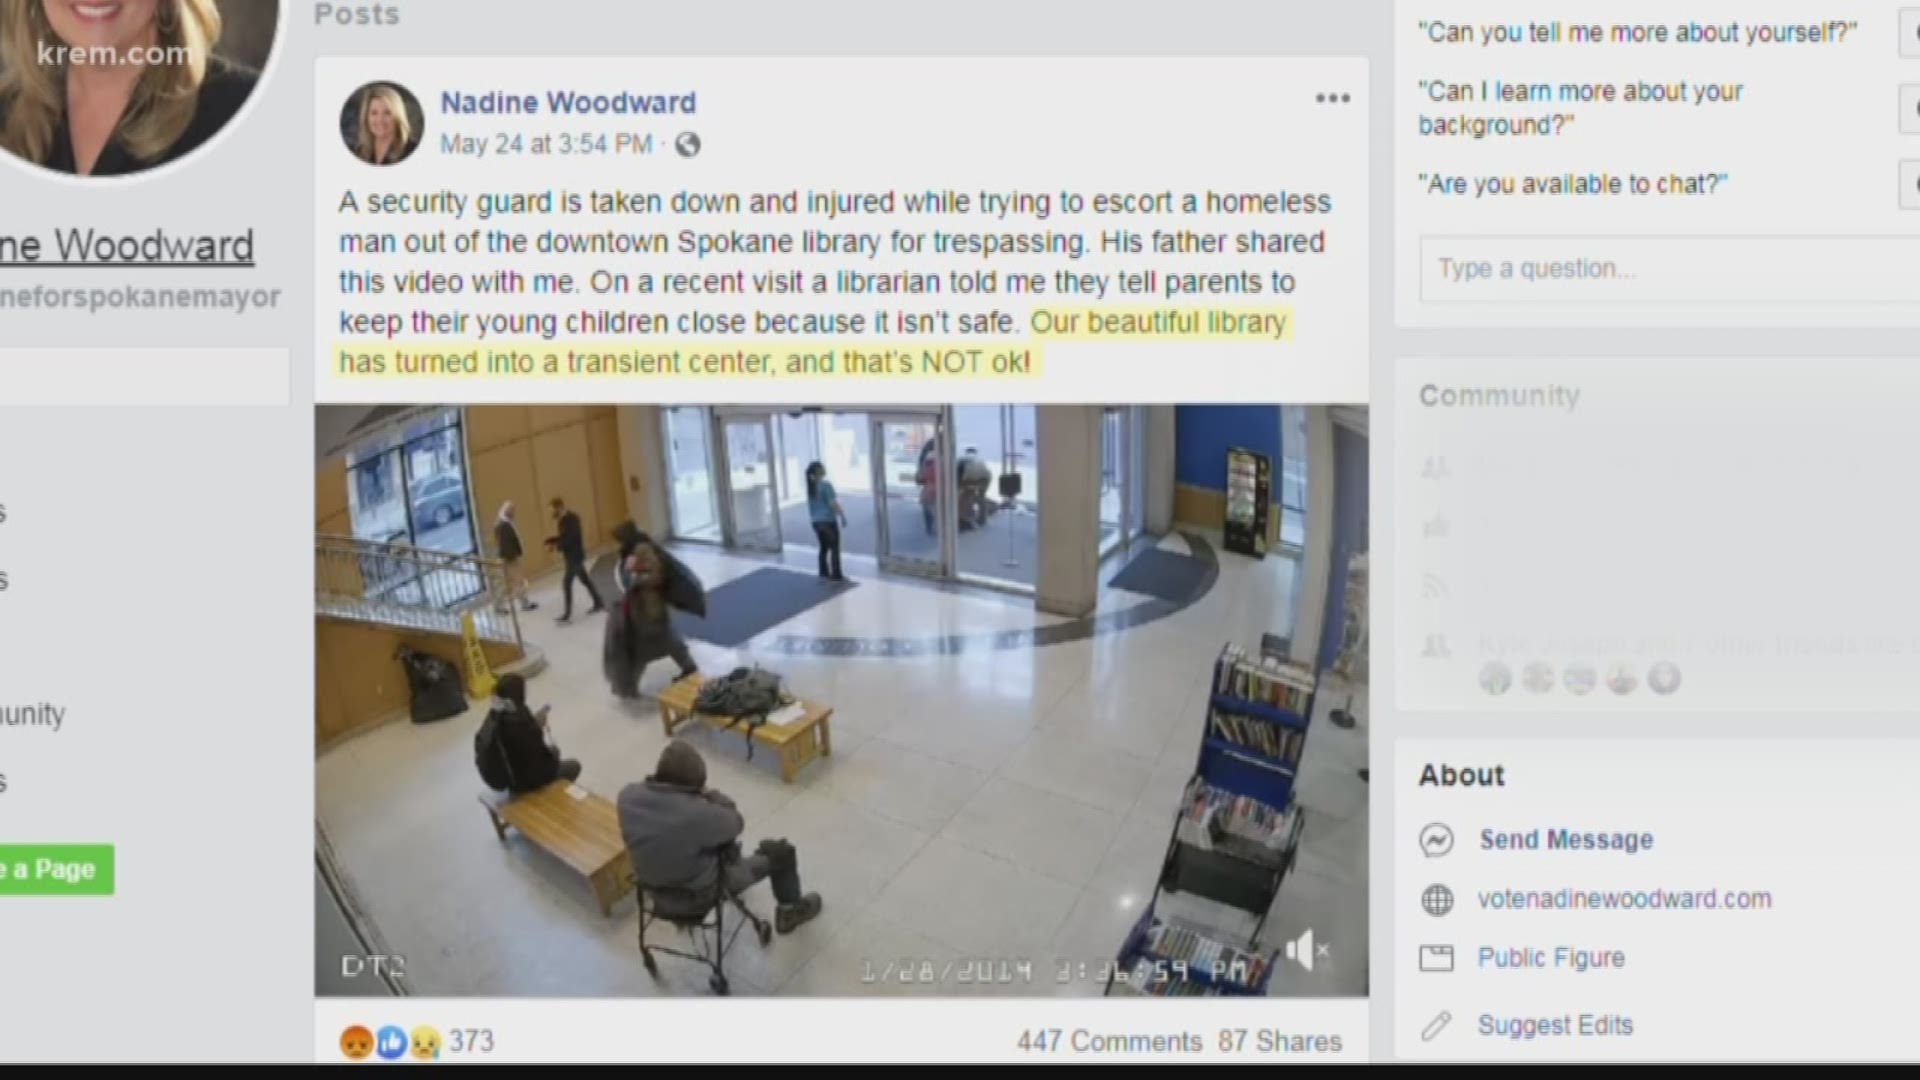 Nadine Woodward was criticized after saying the video showed that homeless people were making the downtown library unsafe.